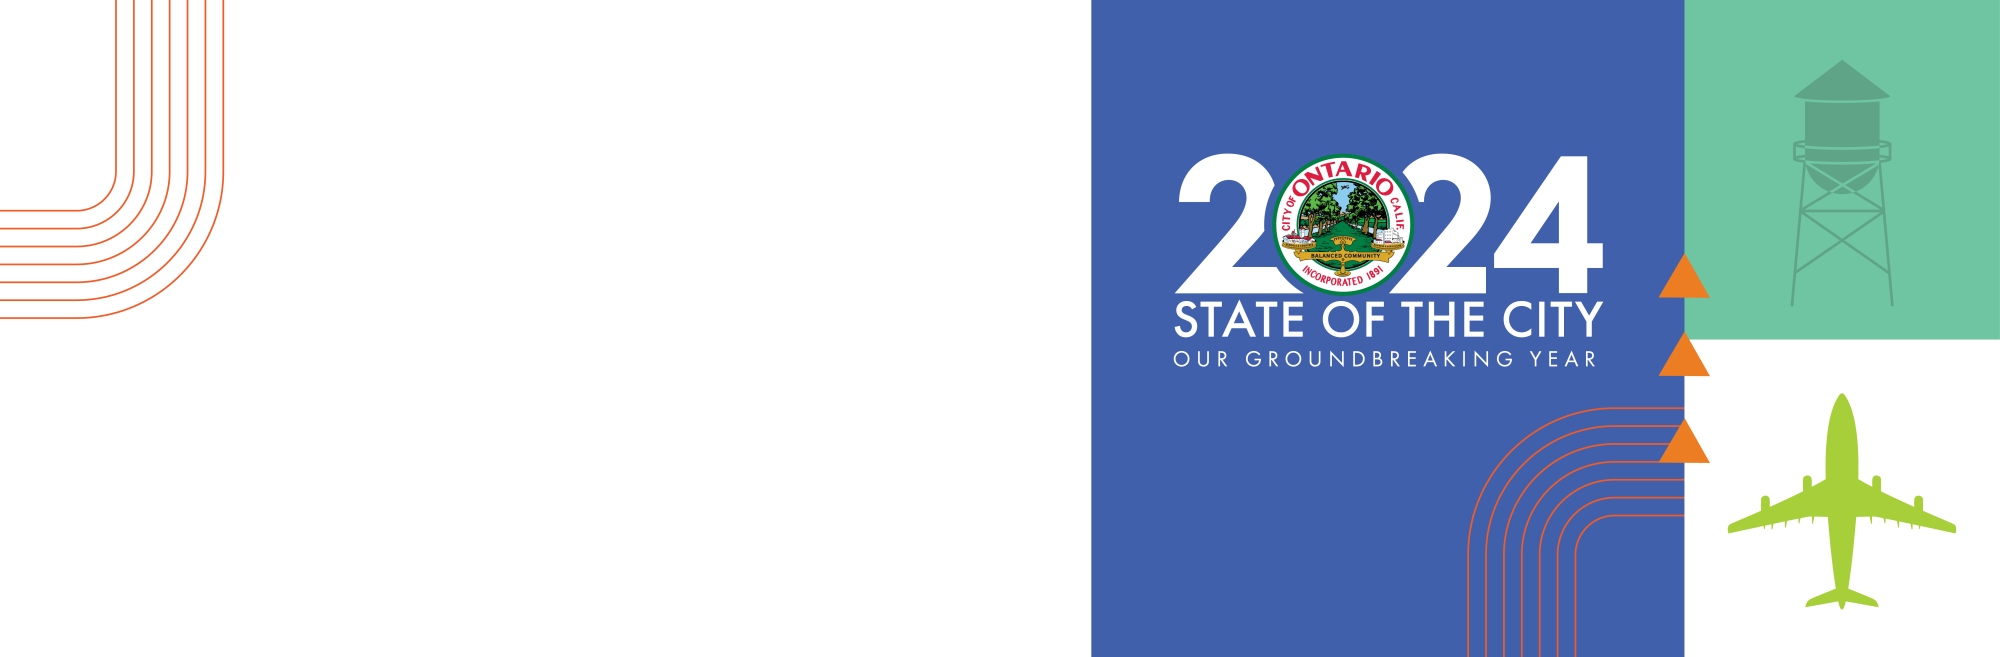 Blue background with text: "2024 State of the City Our Groundbreaking Year"